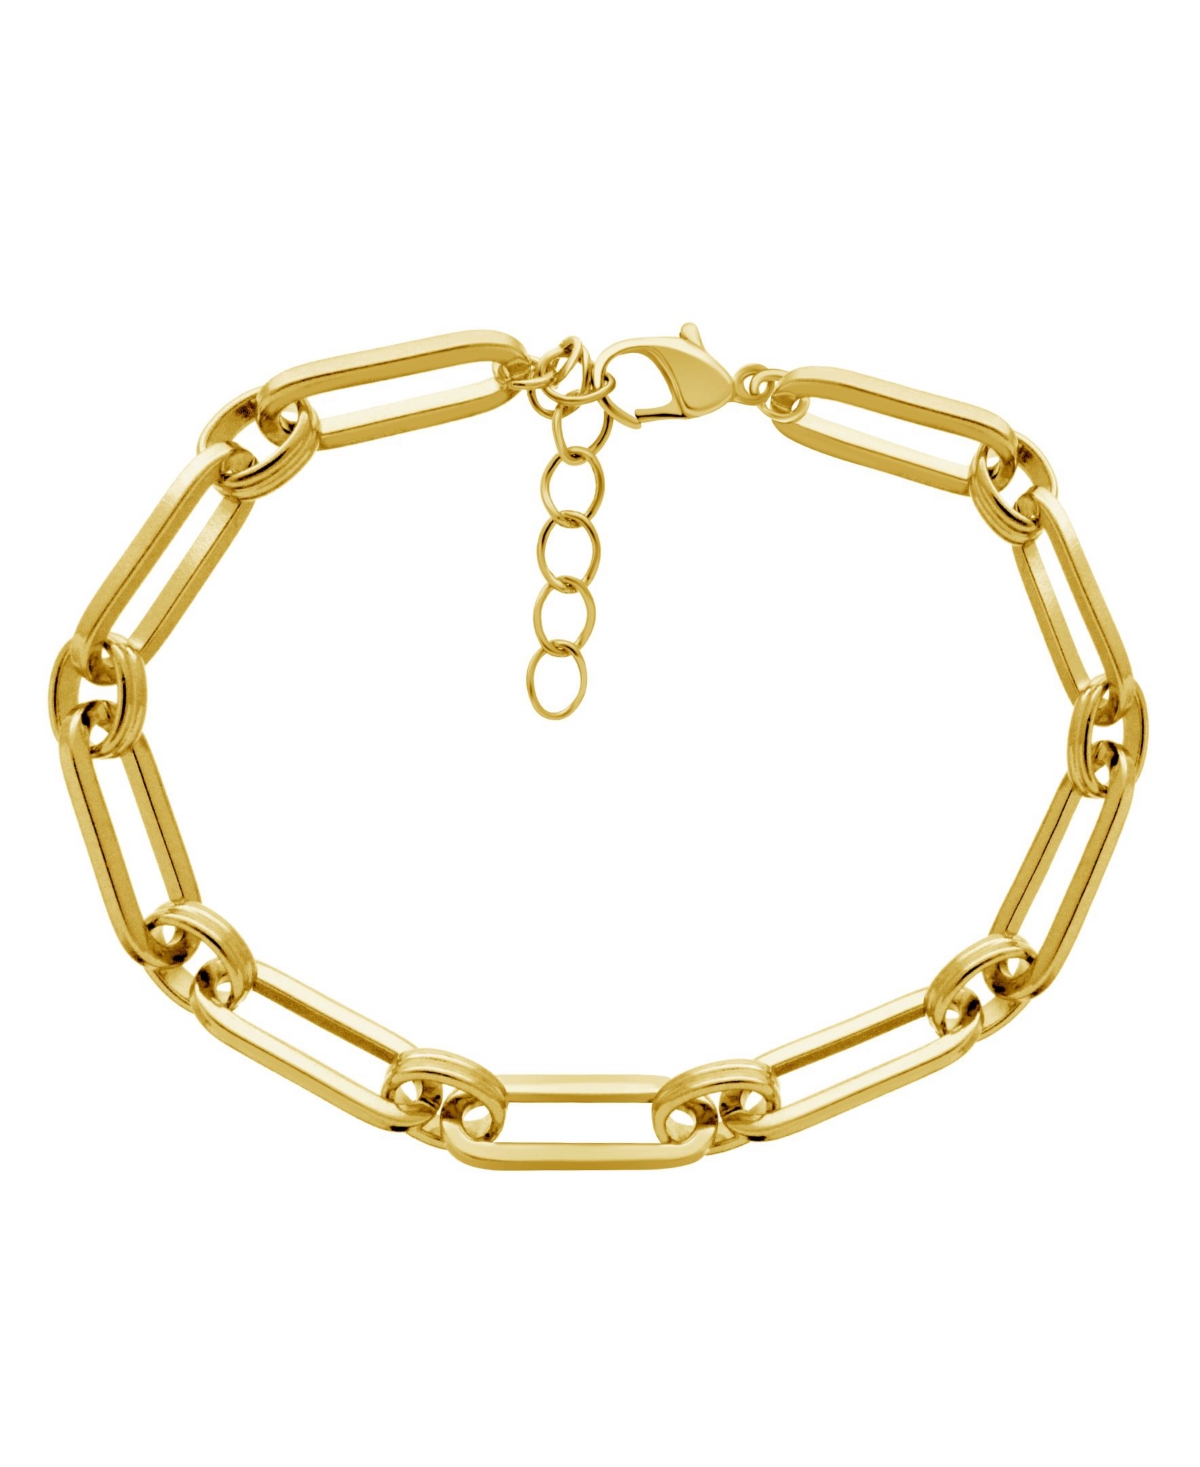 Gold or Silver Plated Circle Oblong Link Bracelet - Silver-Plated